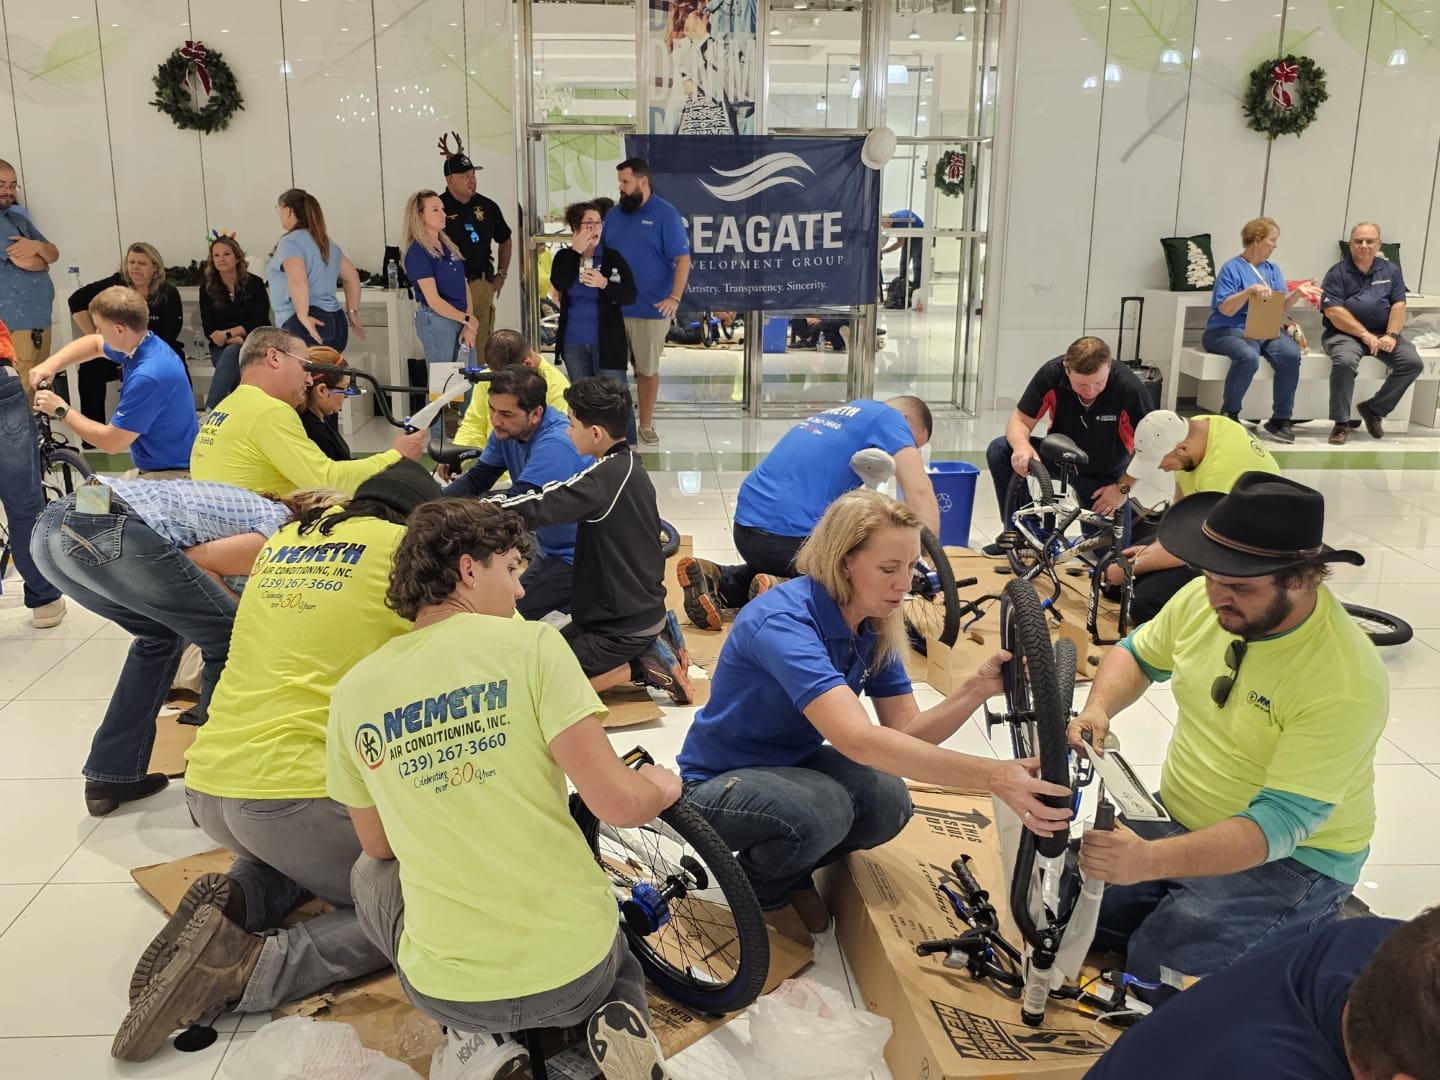 A group of people building bicycles in an indoor area.